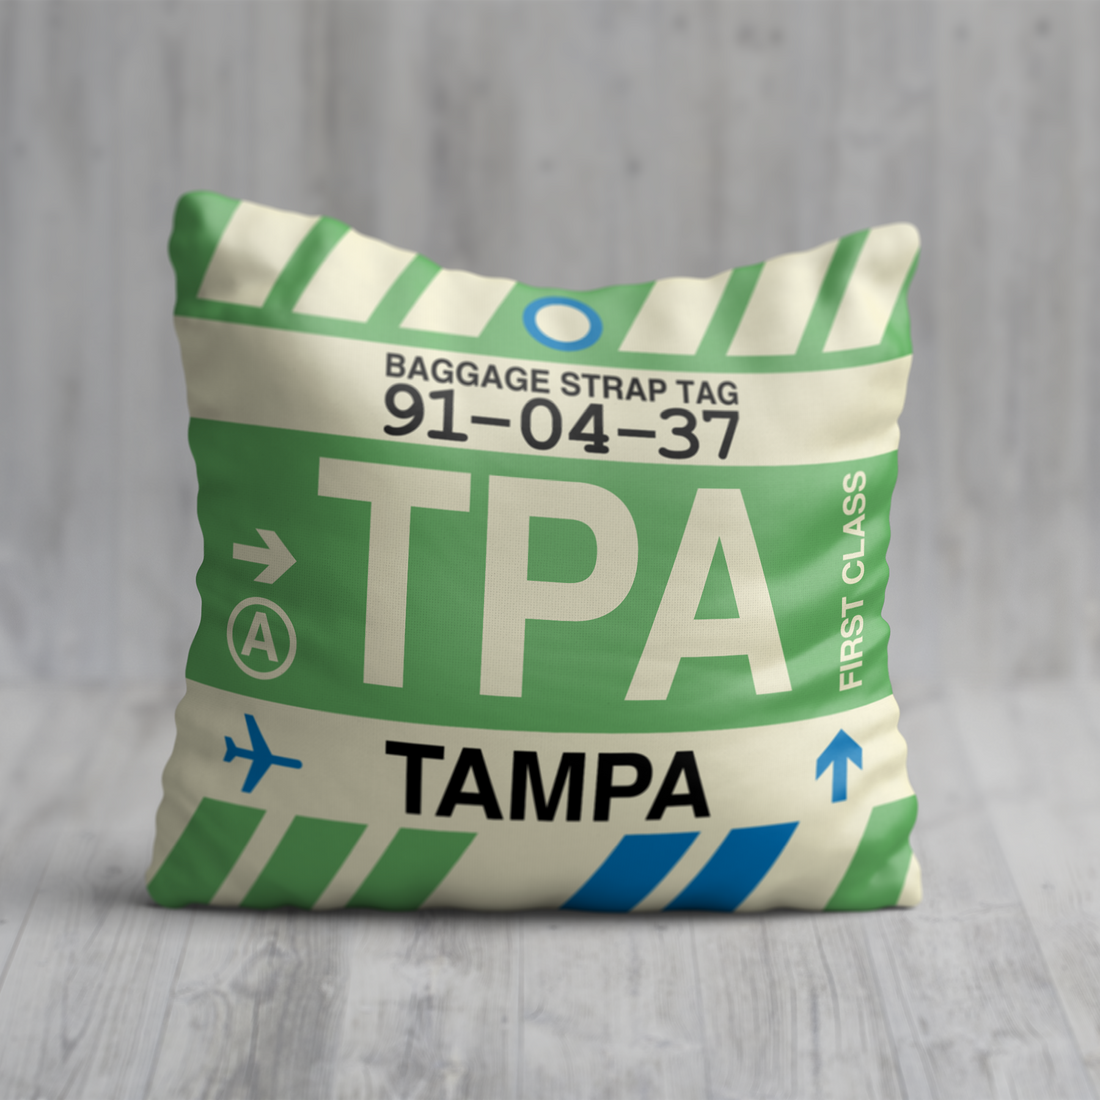 Tampa Gift Ideas • Wall Art & Home Decor Featuring the TPA Airport Code